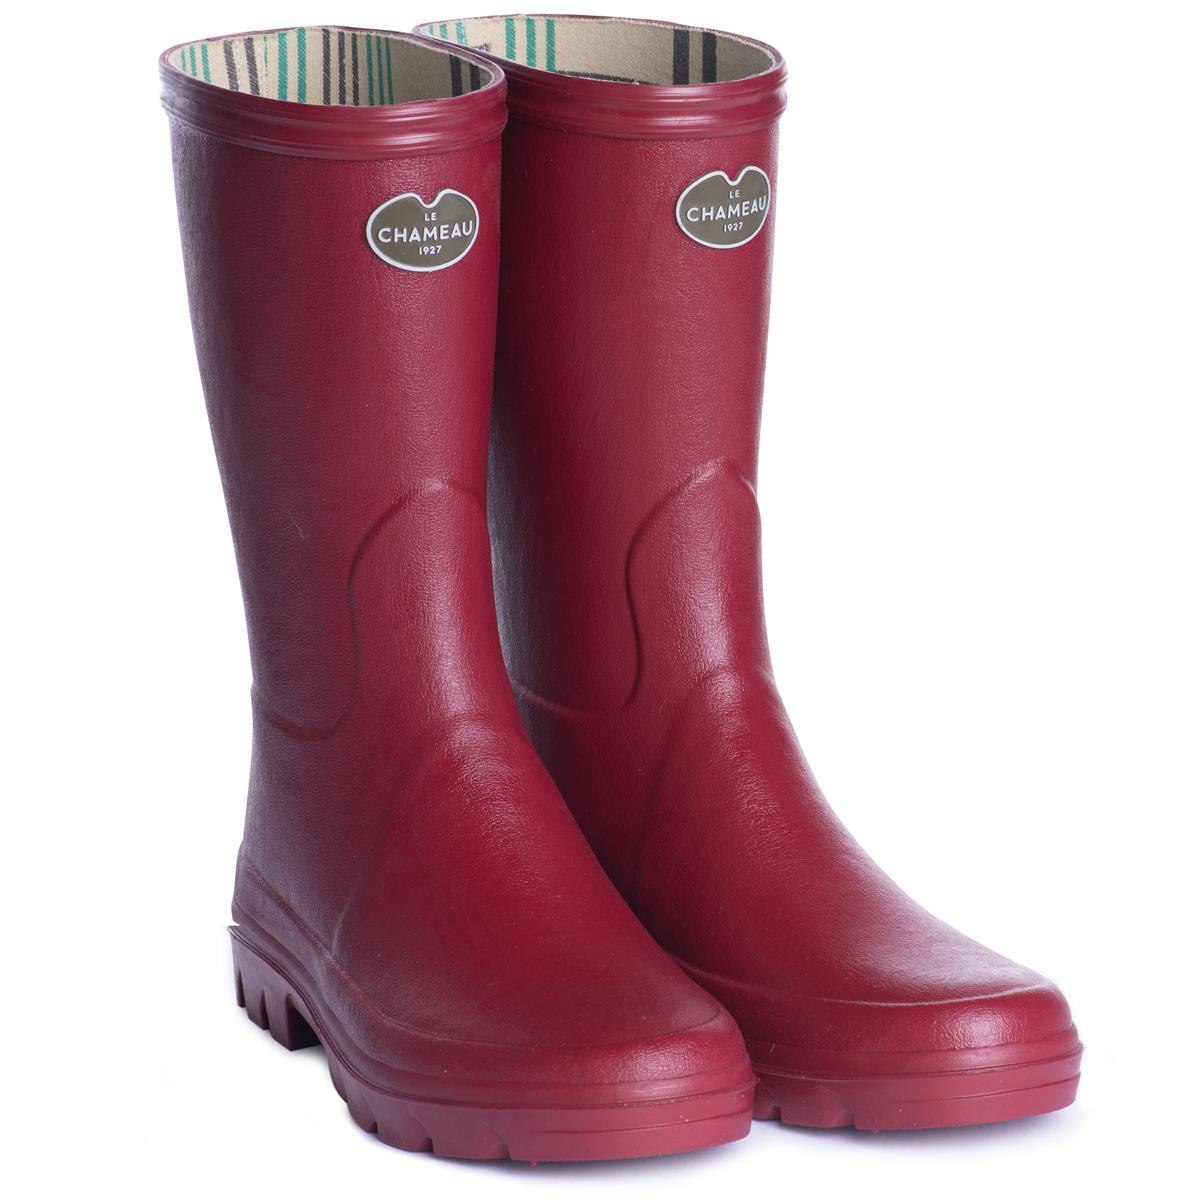 Is the foot width ample in these Le Chameau Women's Iris Bottillon Boots?